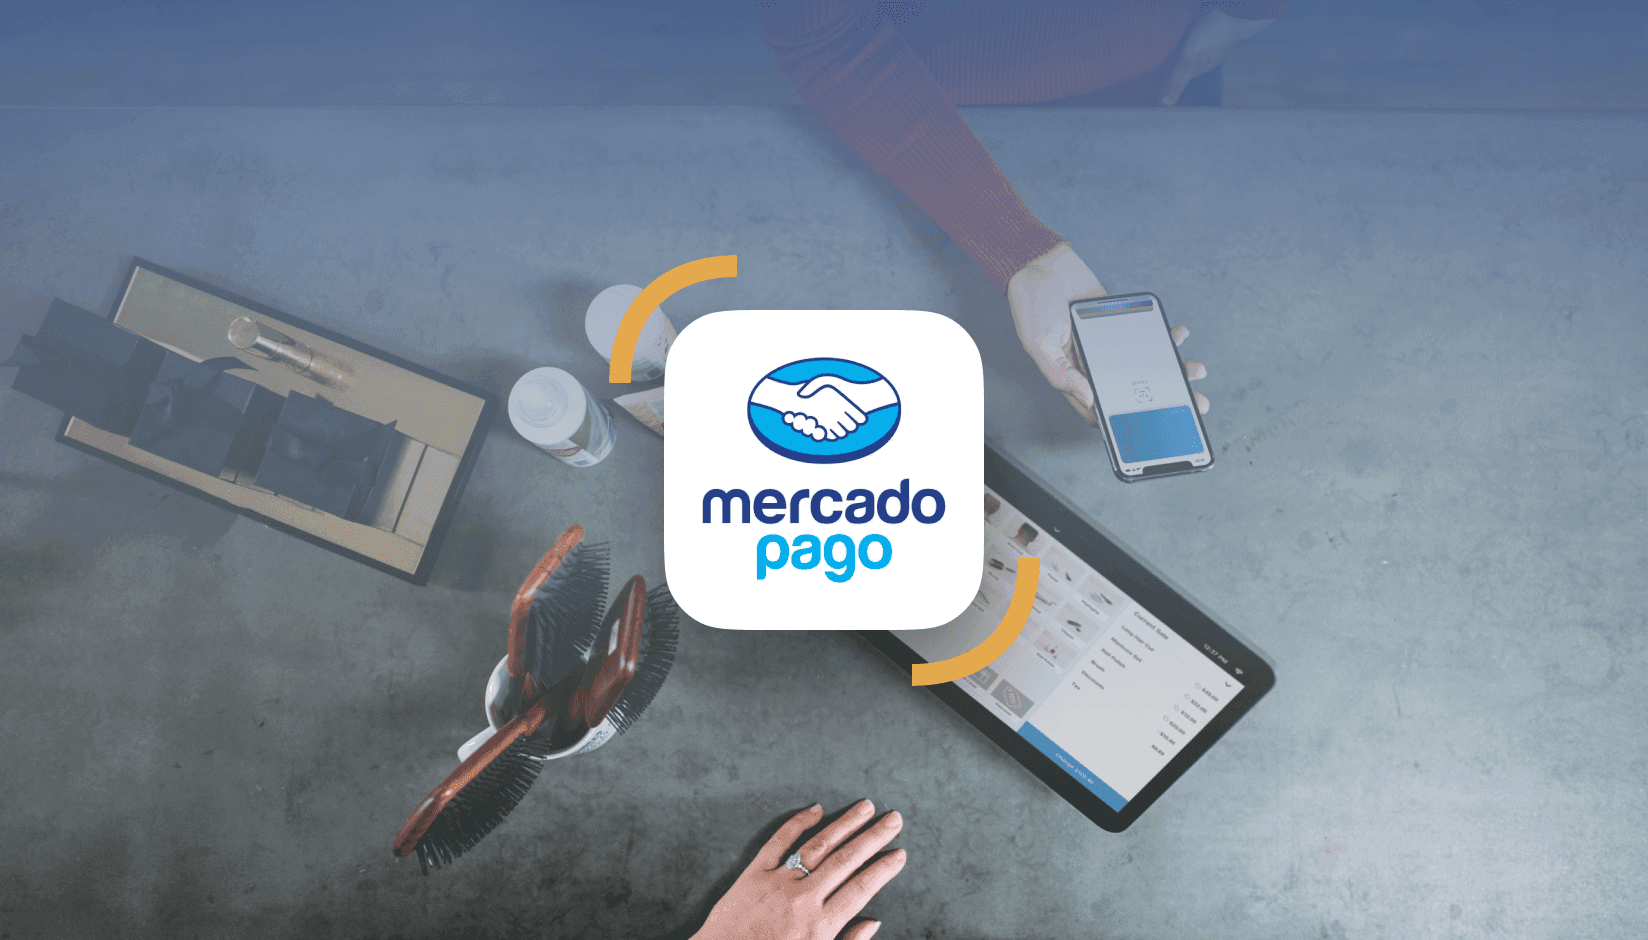 andcards Partners with Mercado Pago for Latin American Coworking Payments